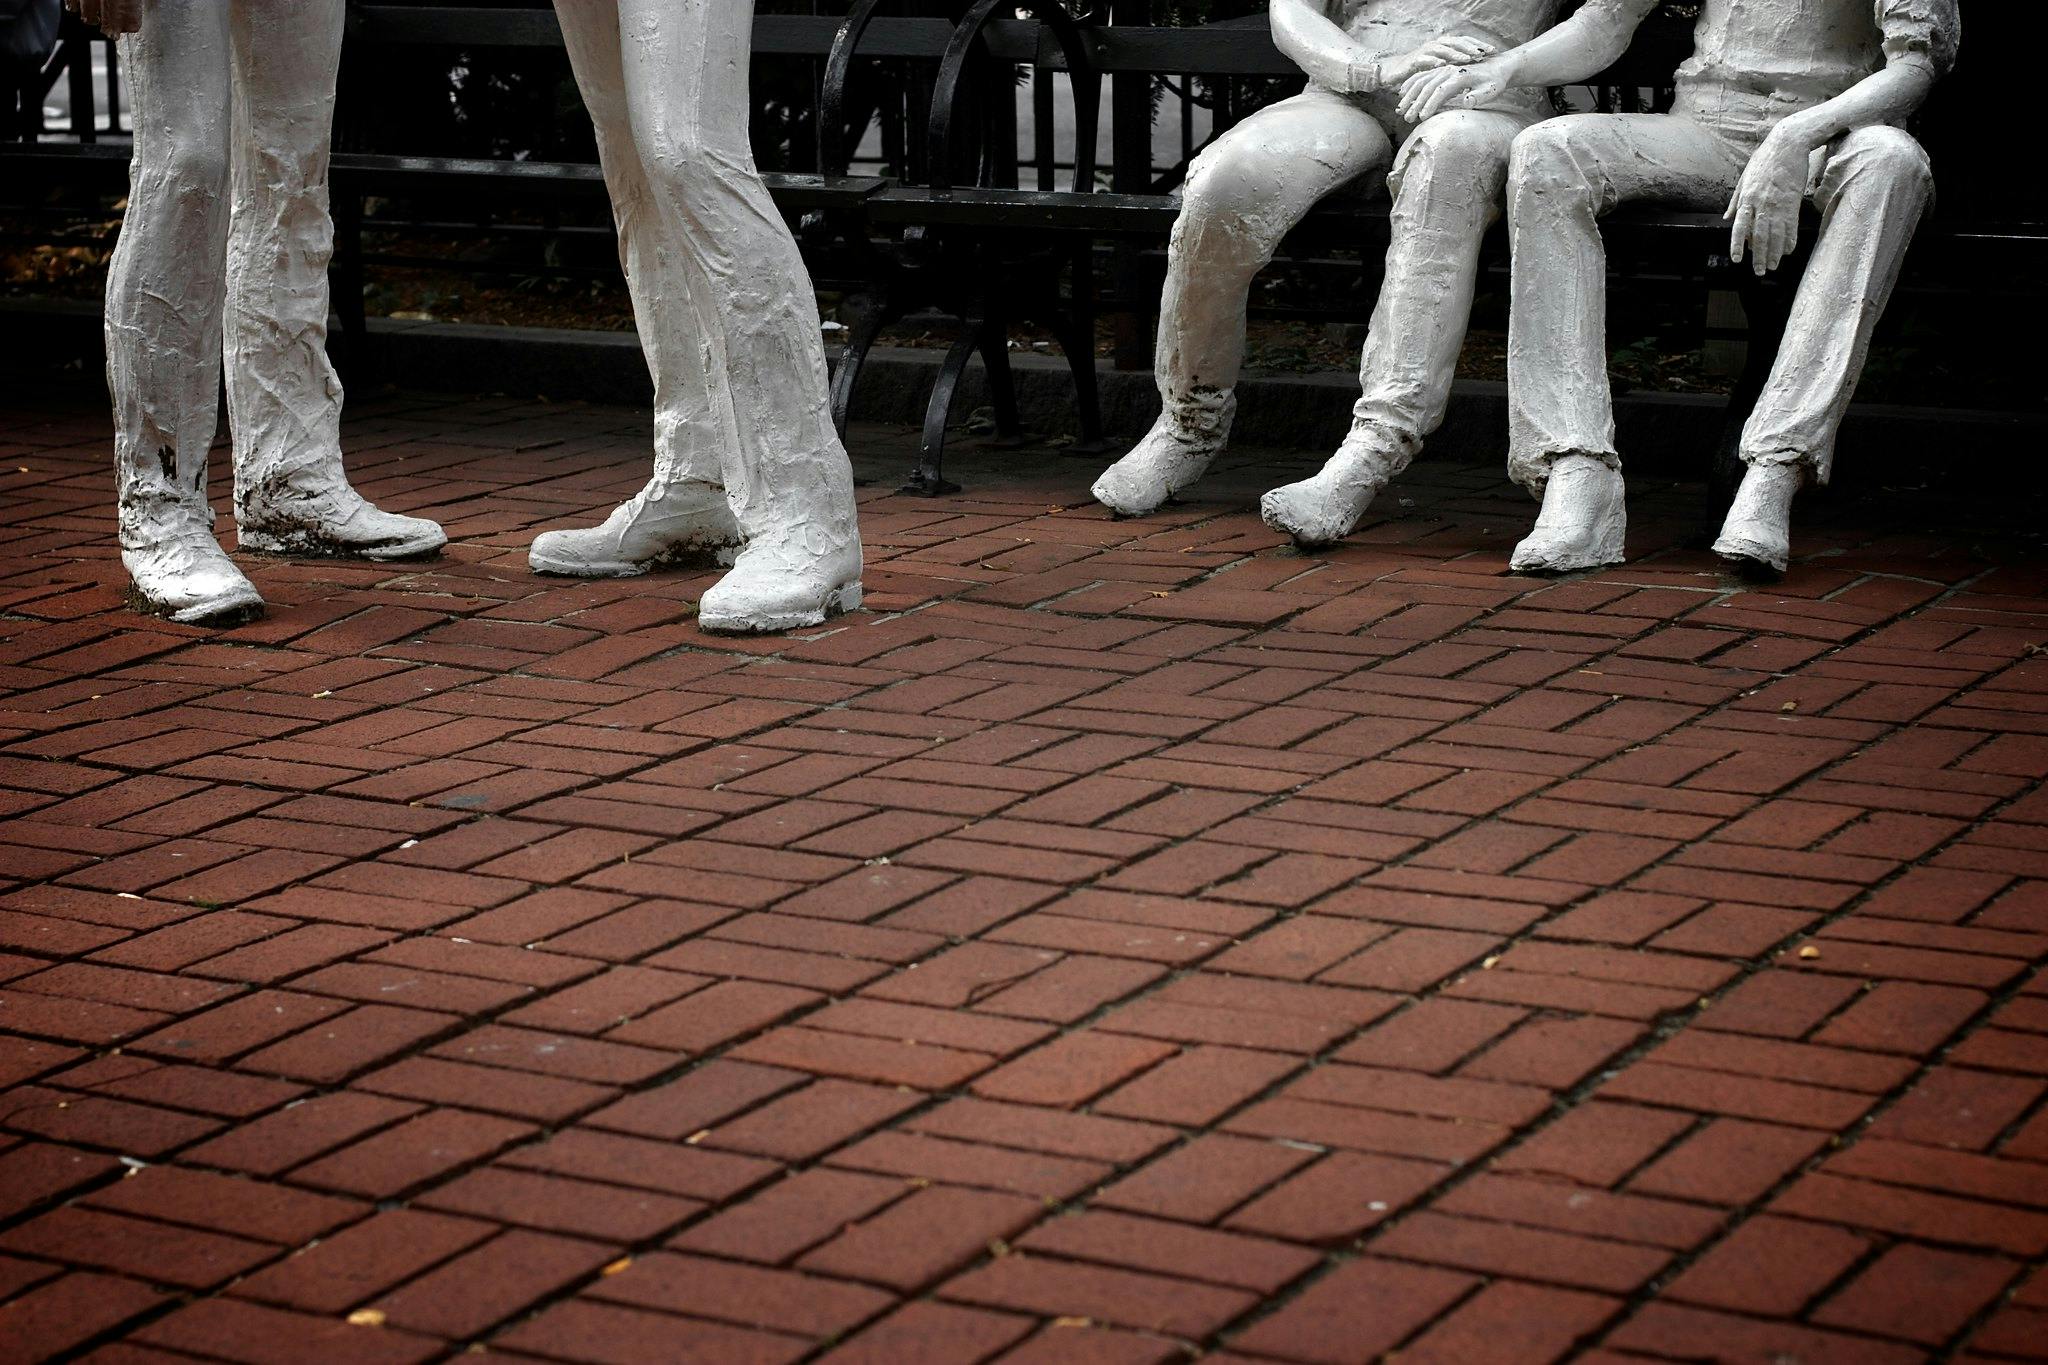 A low shot of George Segal's "Gay Liberation Monument" at the Stonewall Inn. Public sex played a key role in early queer history during the post-Stonewall era.